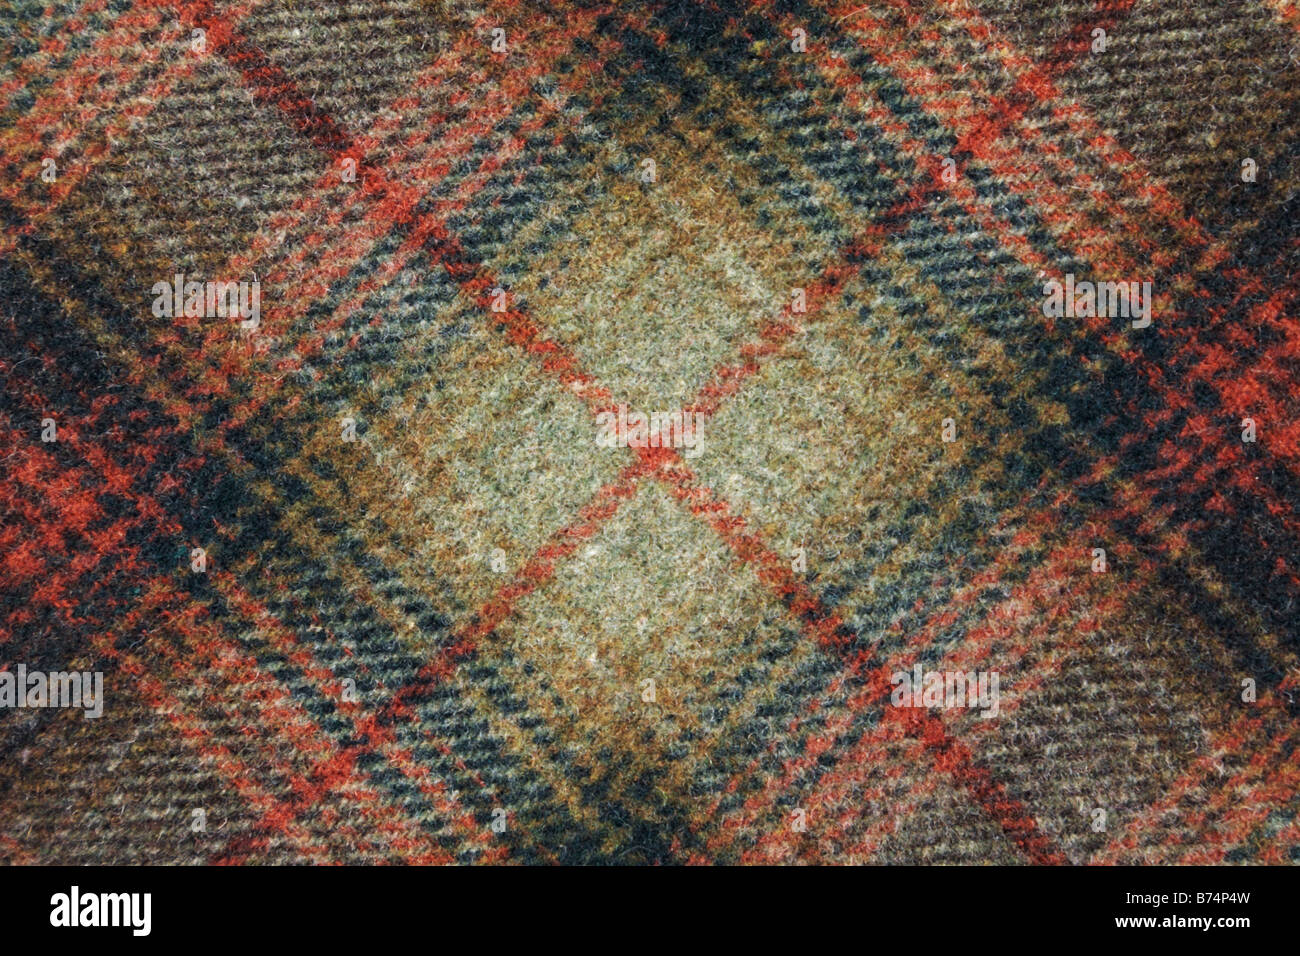 Check patterned tweed fabric sample Stock Photo